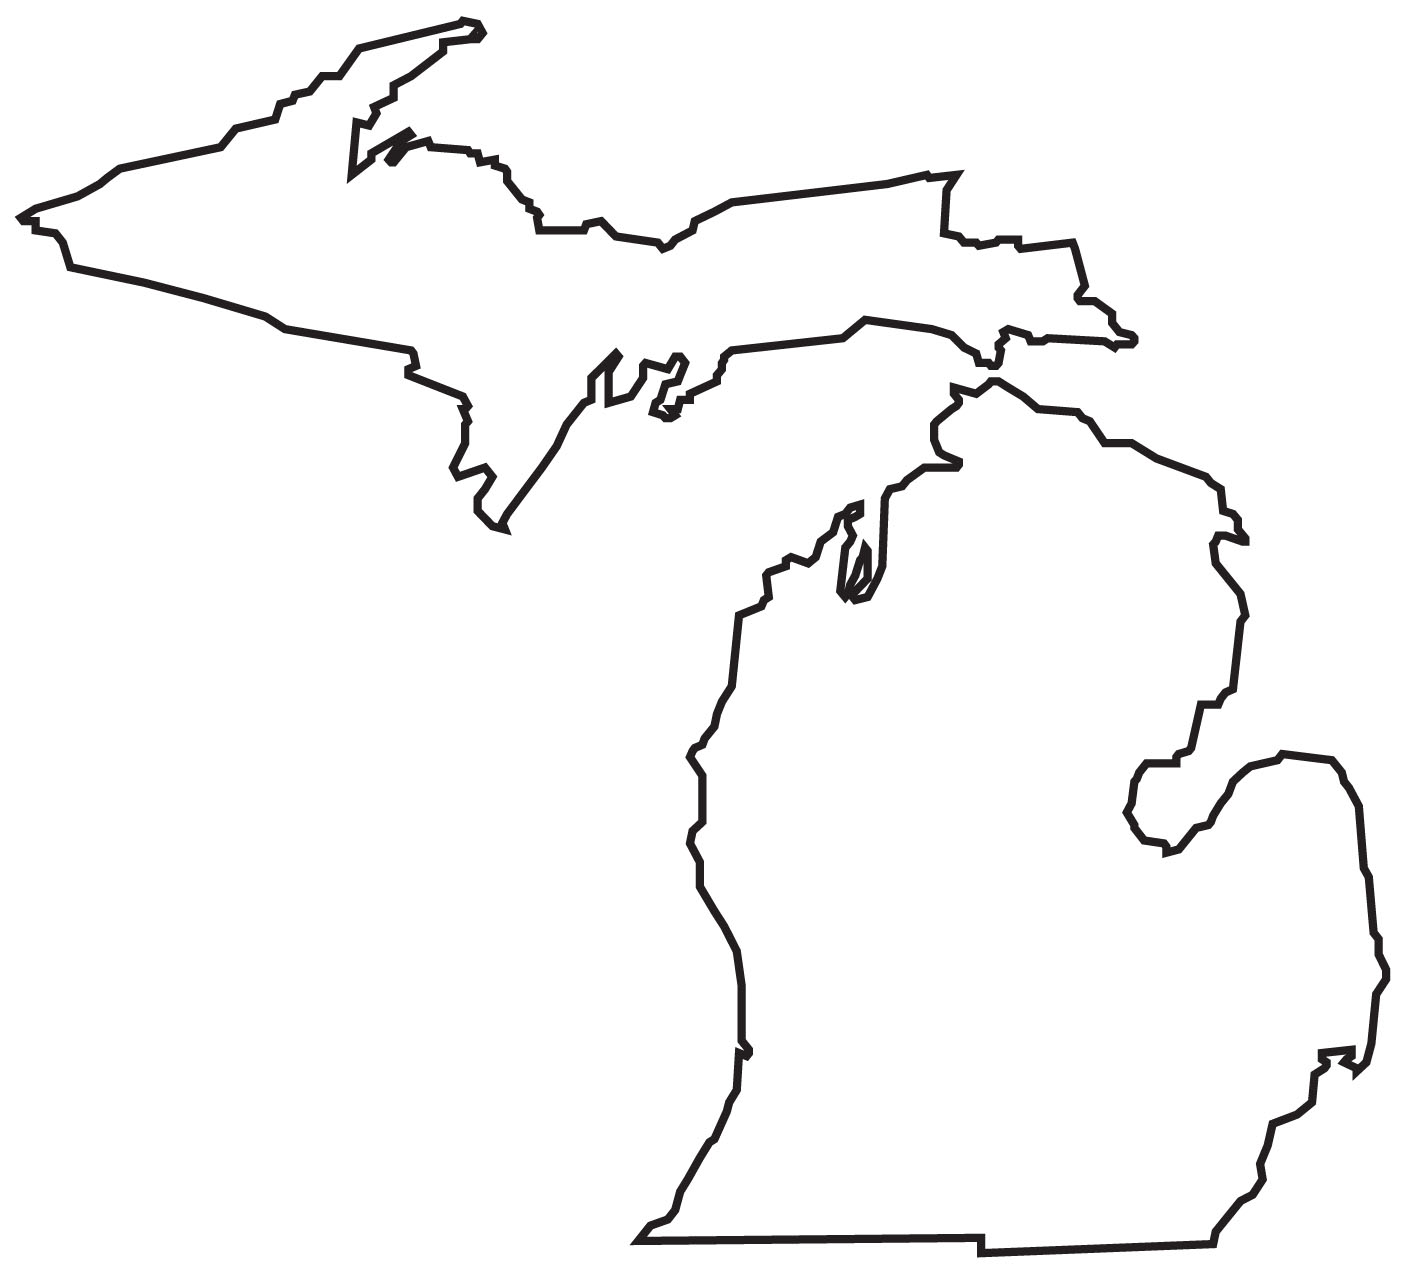 Michigan Printable Map - ClipArt Best - ClipArt Best